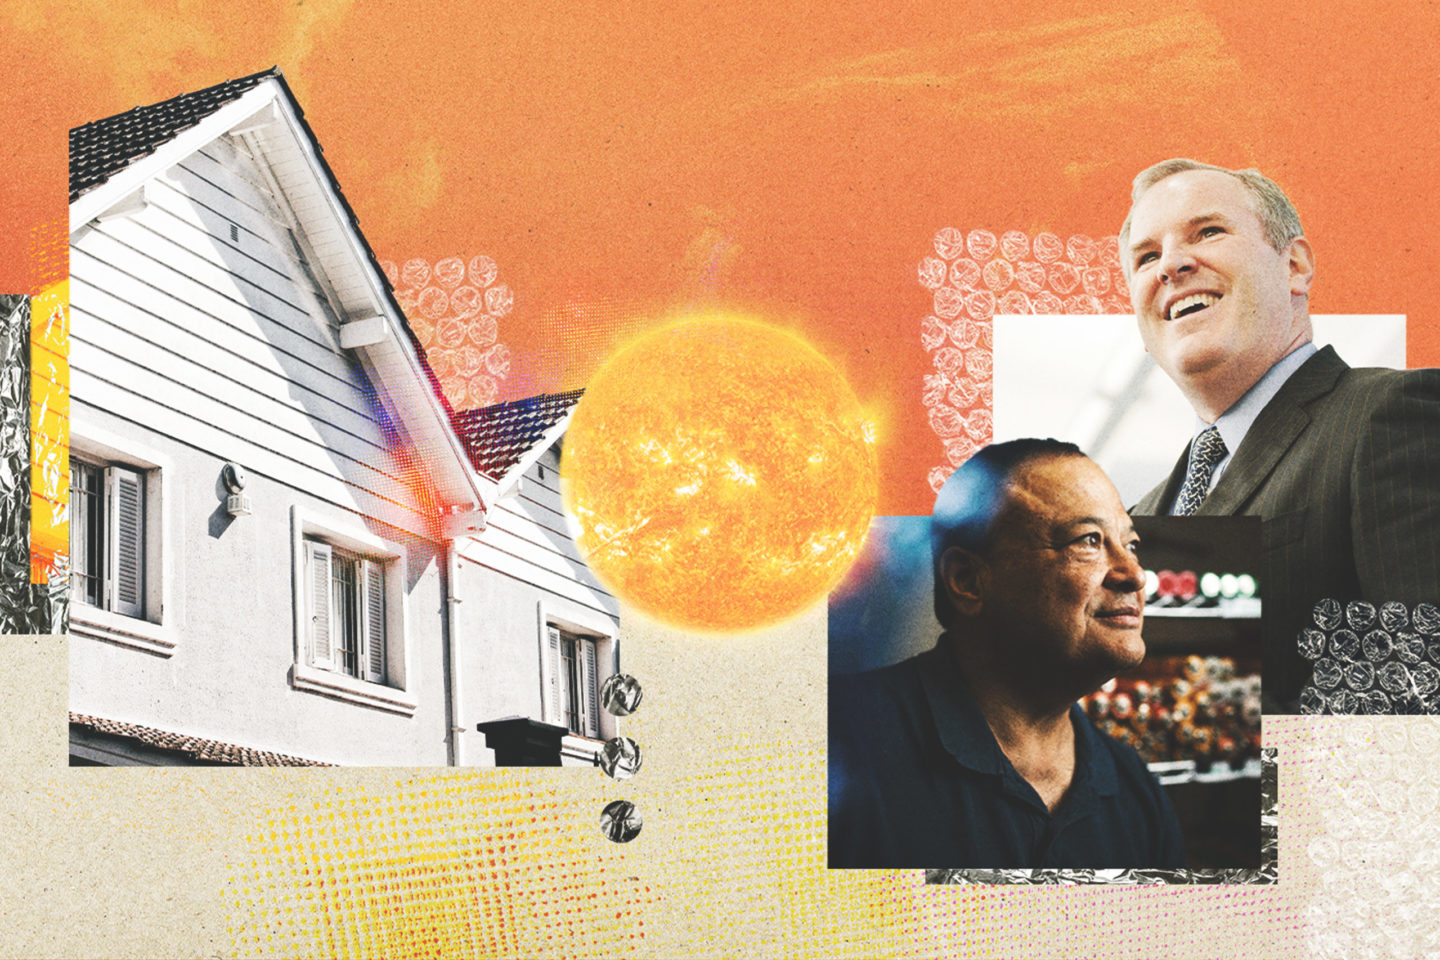 Illustration of the sun, a house, and 2 people